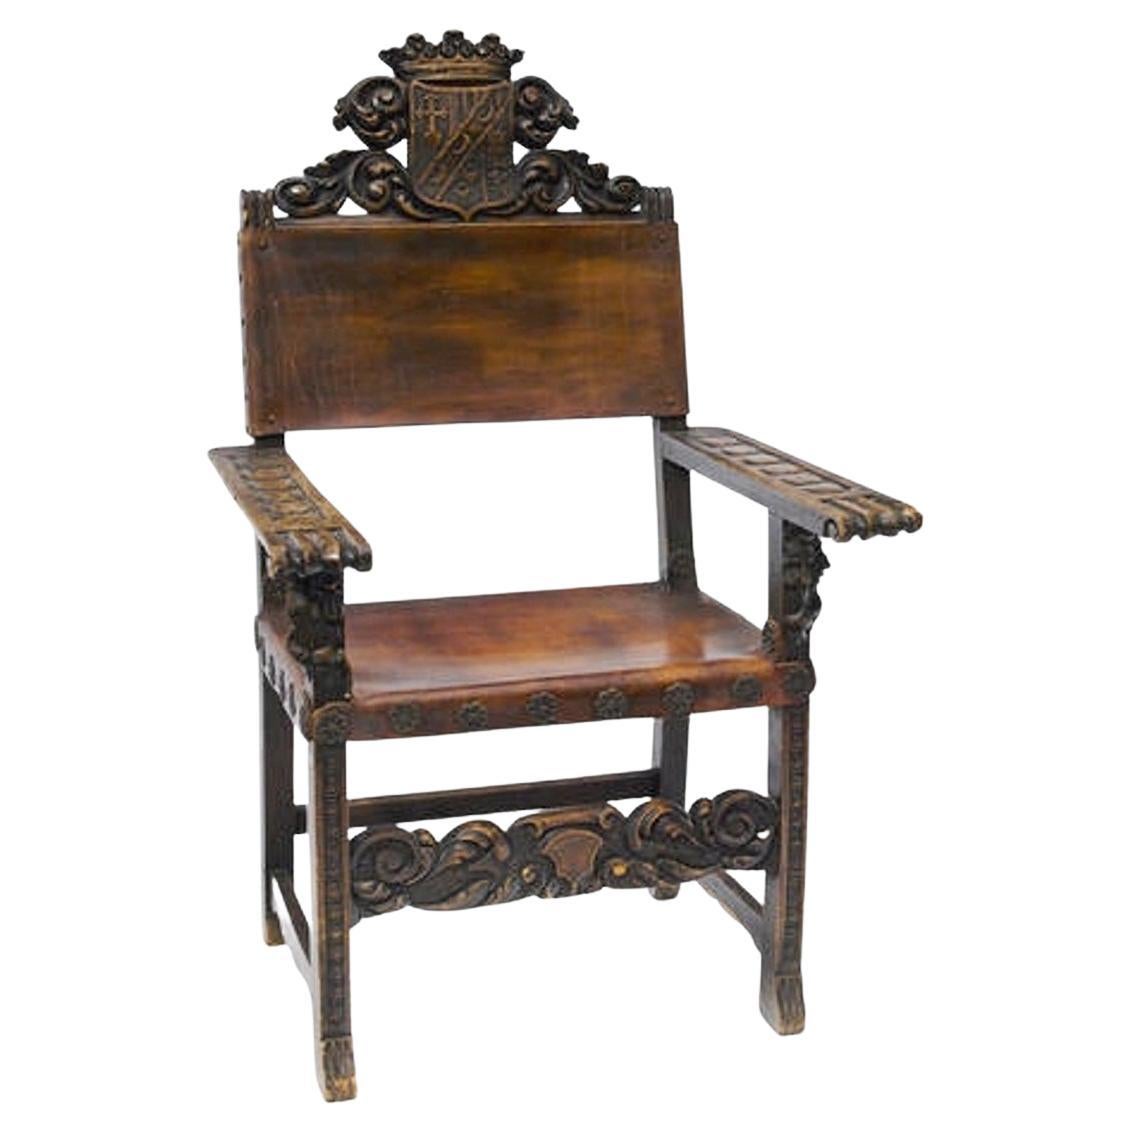 Spanish Baroque walnut armchair with crown and coat of arm, Early 19c   For Sale